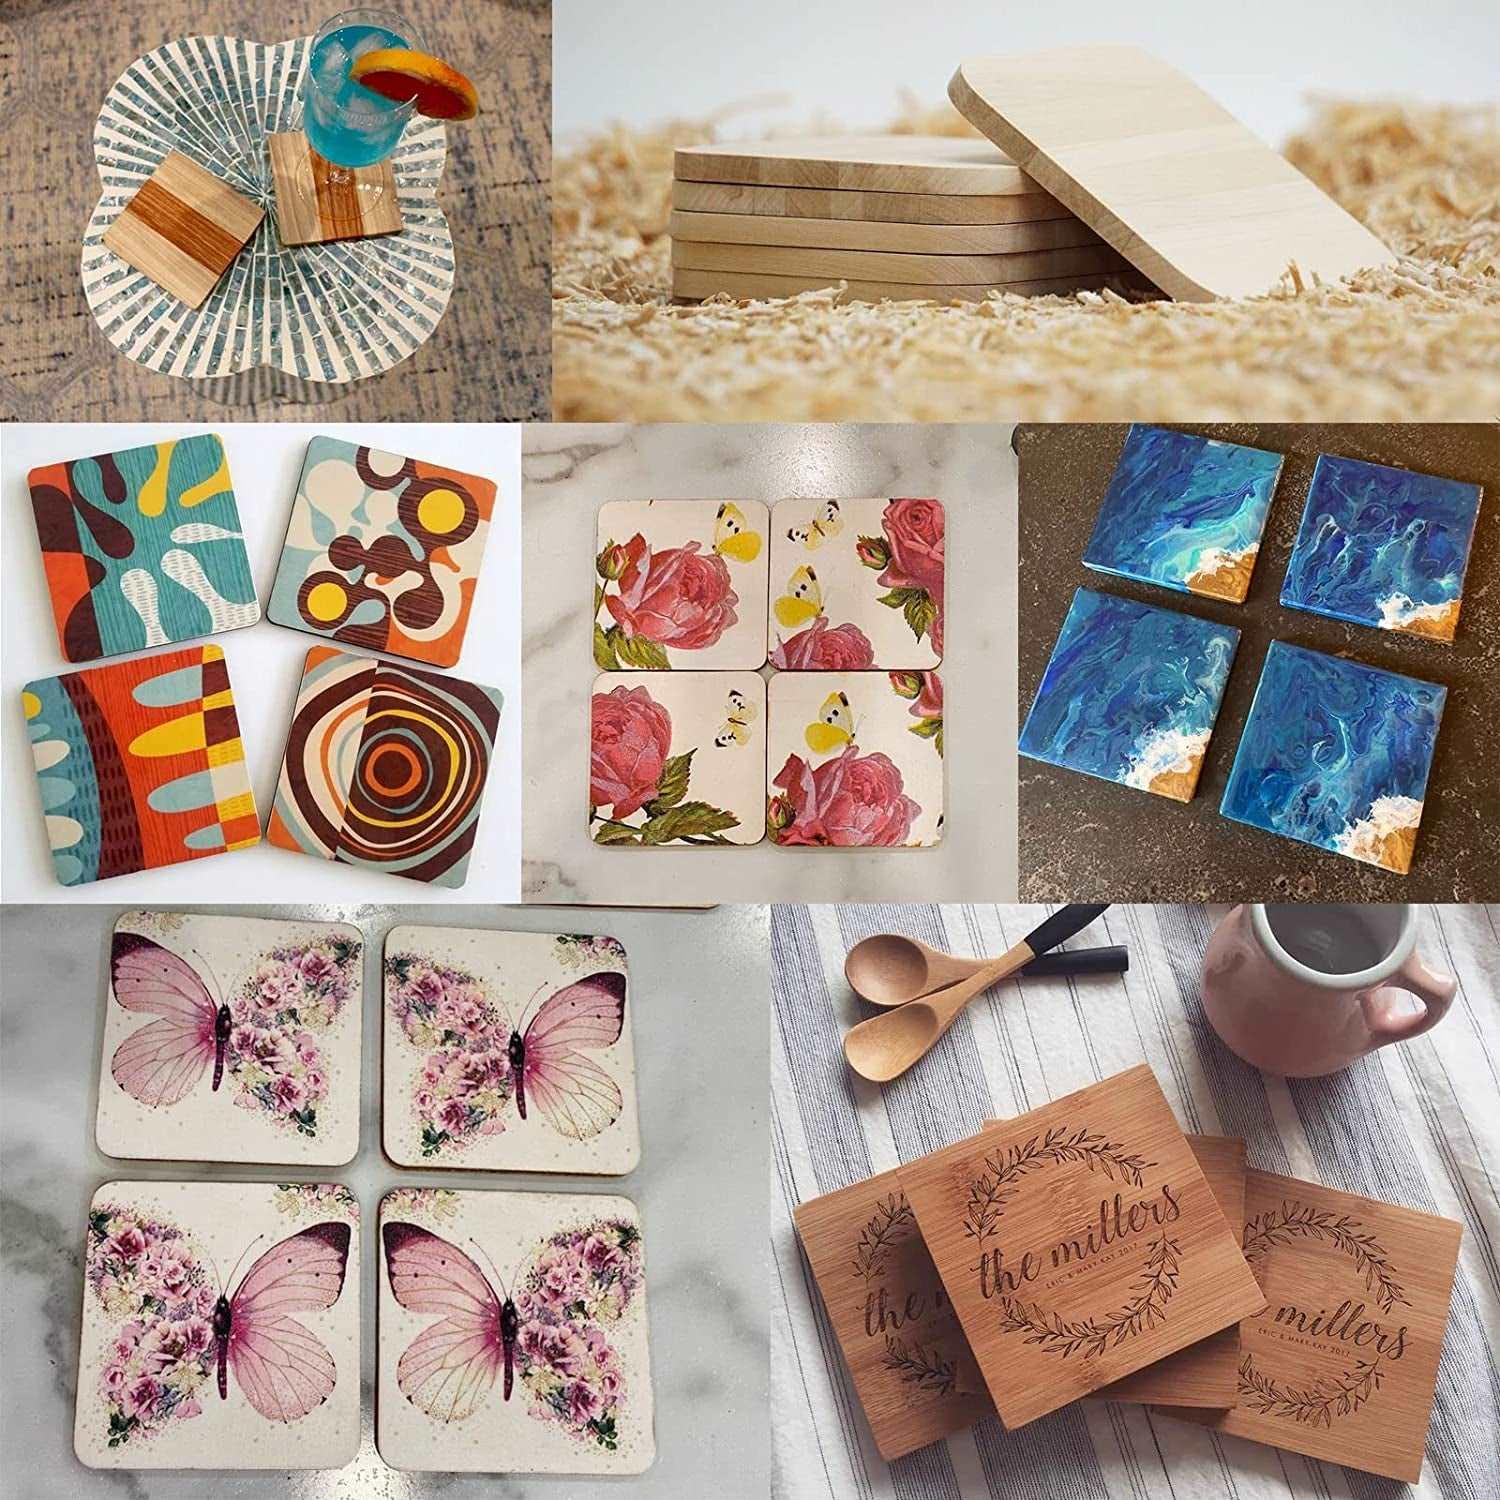 12 Pack Unfinished Wood Coasters for Crafts, Squares with Non-Slip